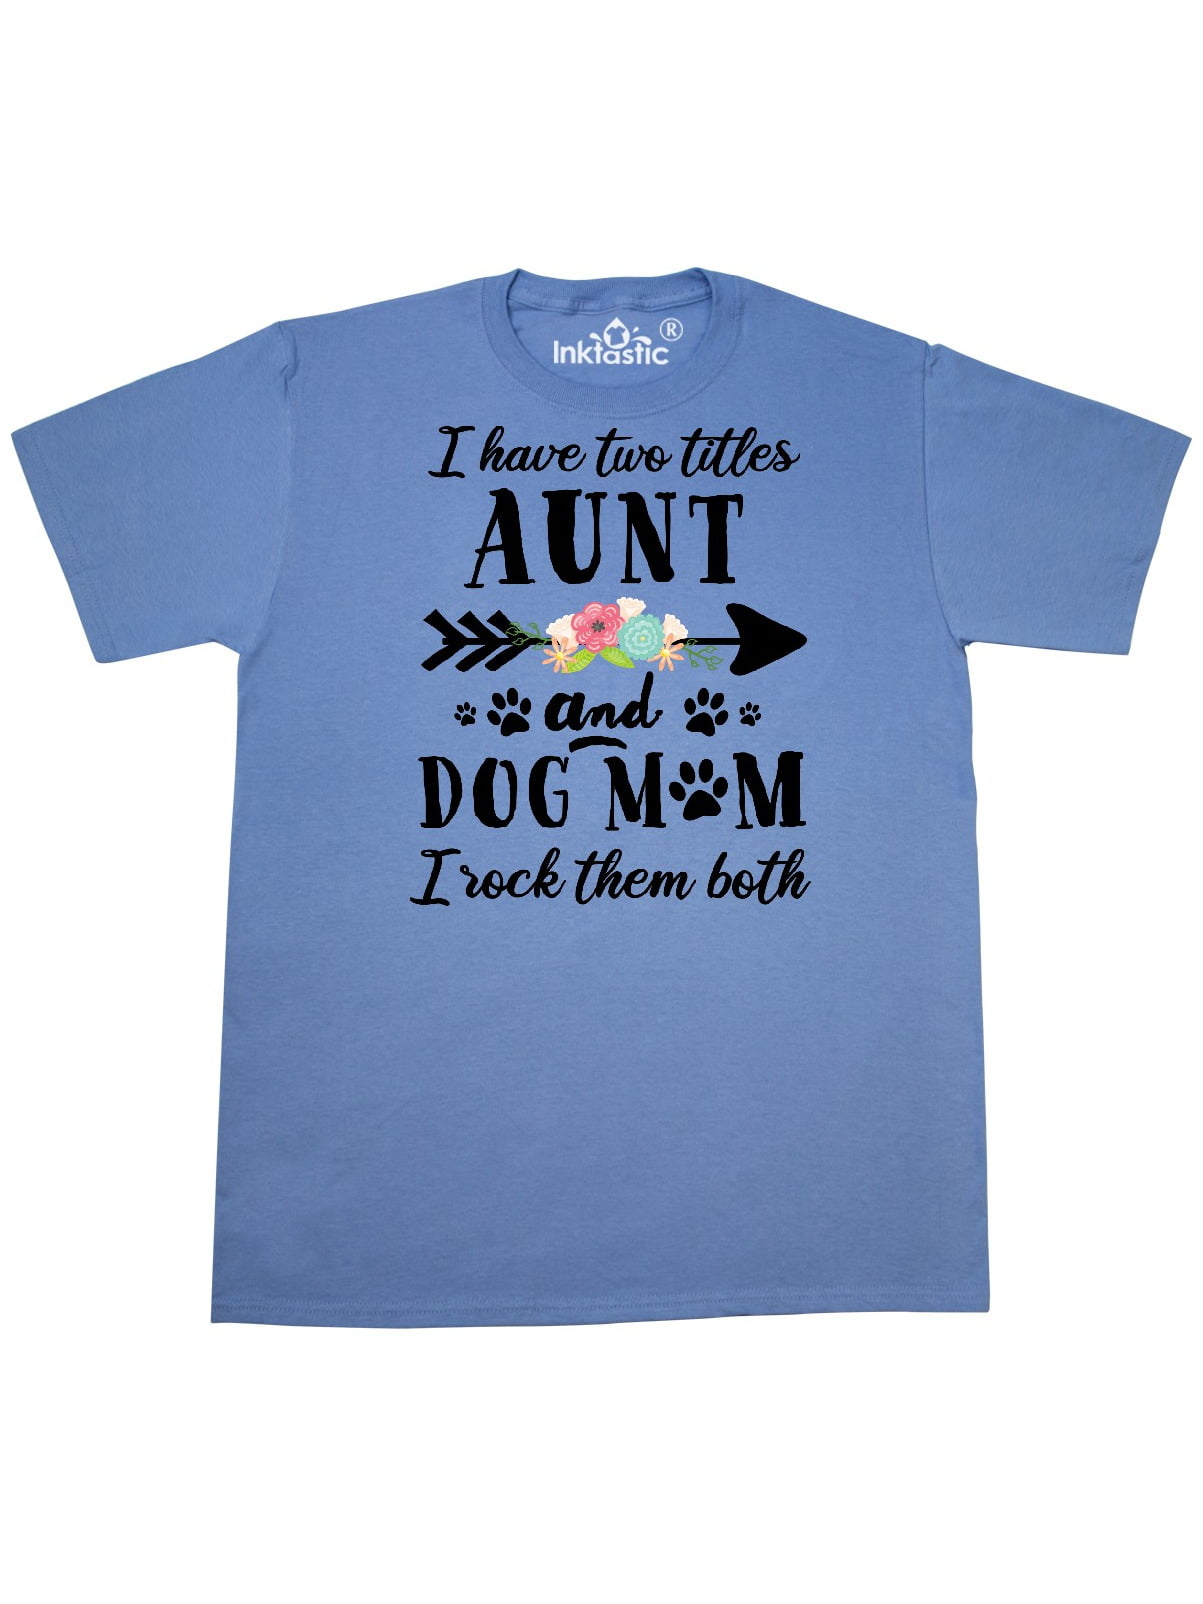 Aunt Gift I Have Two Titles Aunt and Dog Mom and I Rock Them Both Shirt Dog Mom Gift